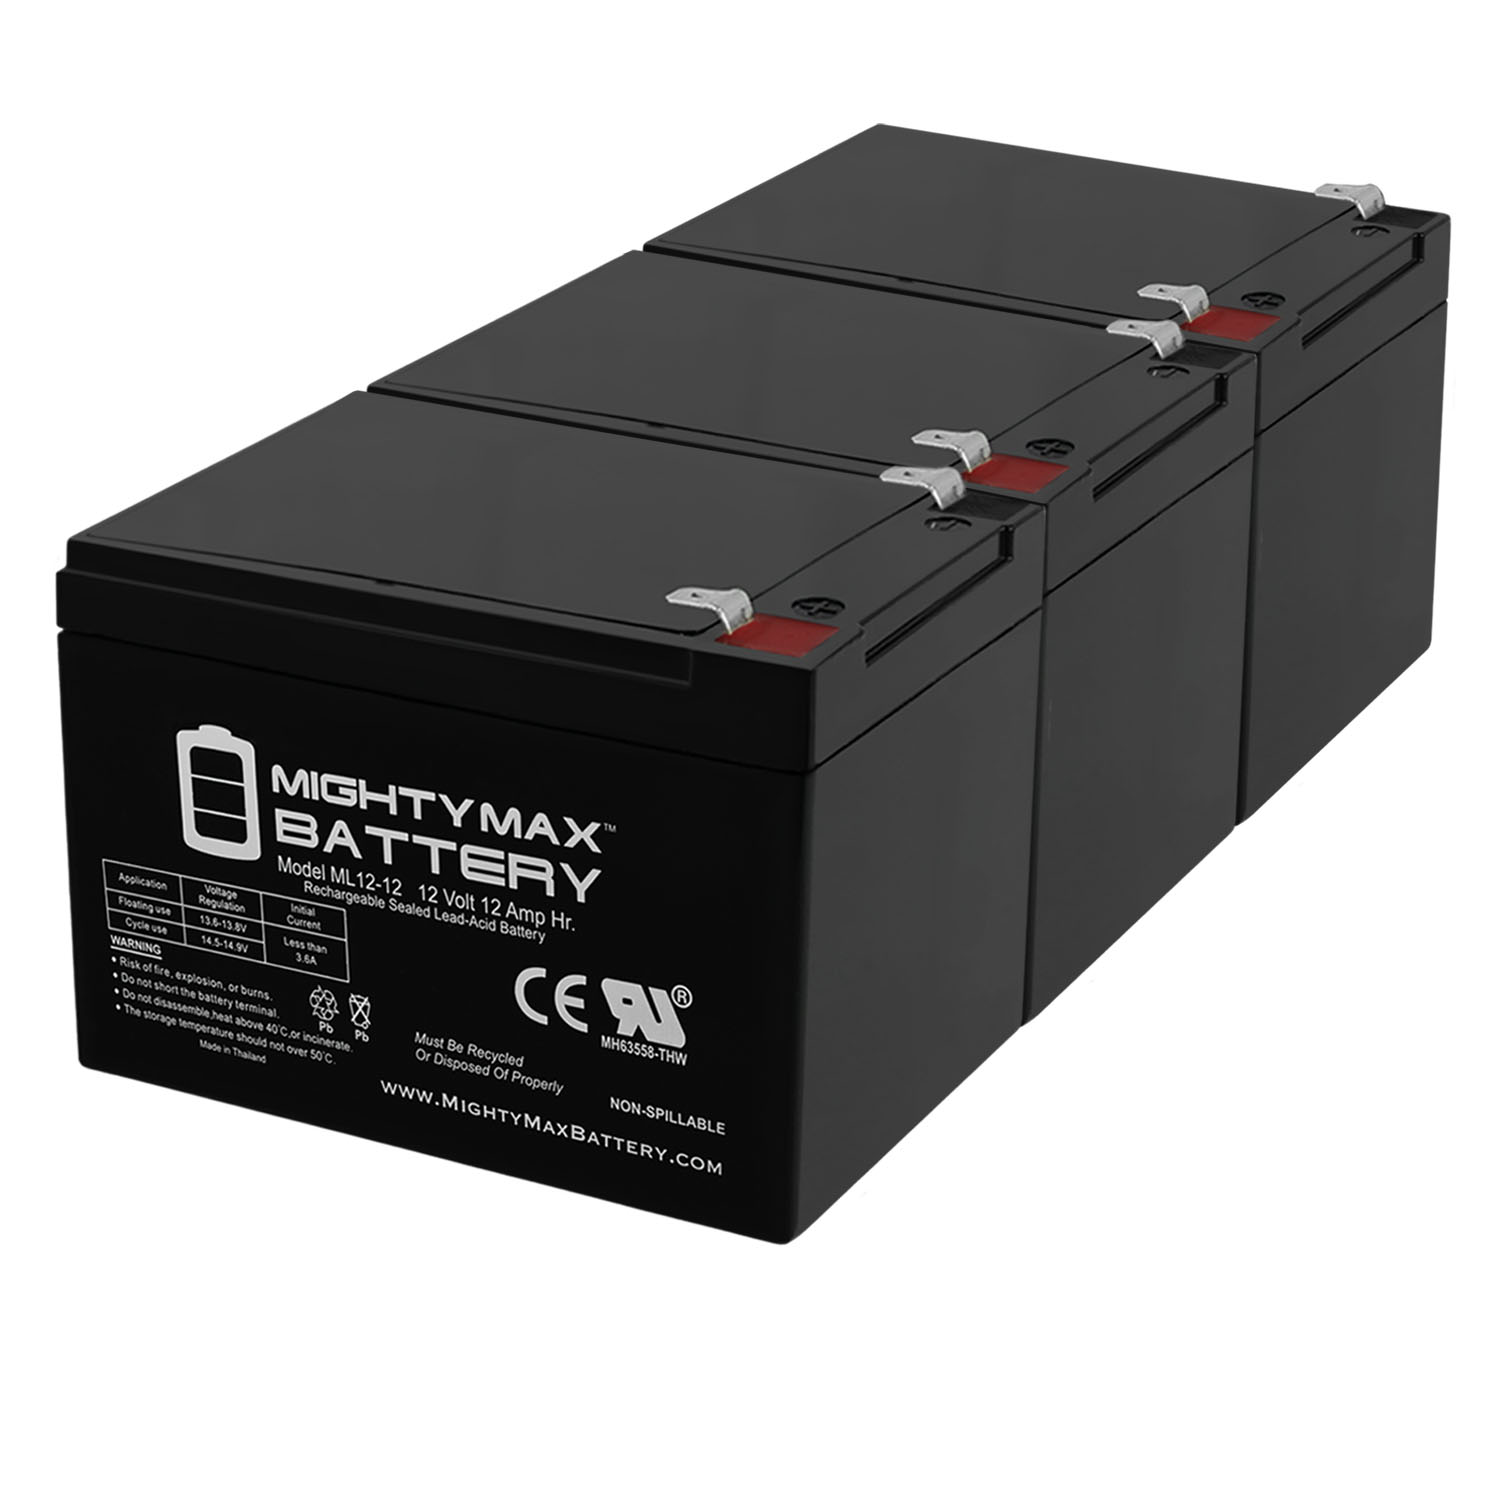 12V 12Ah F2 Lead Acid Replacement Battery compatible with Belkin F6C1000ei-TW-RK  - 3 Pack